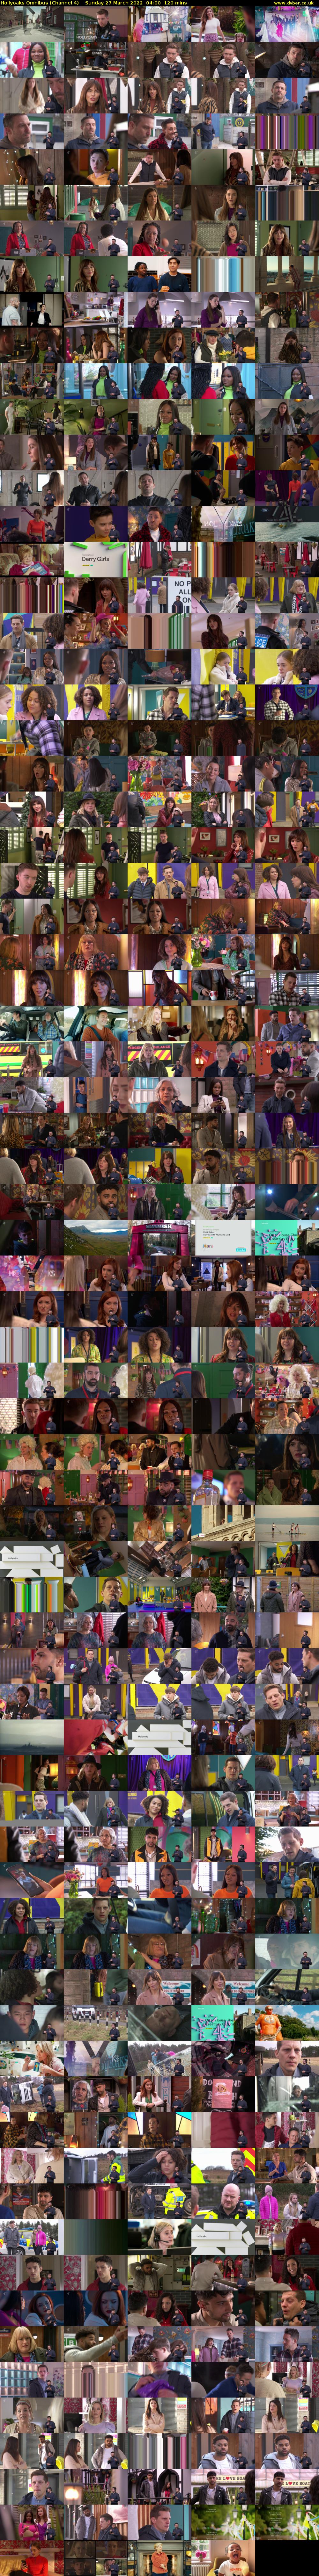 Hollyoaks Omnibus (Channel 4) Sunday 27 March 2022 04:00 - 06:00